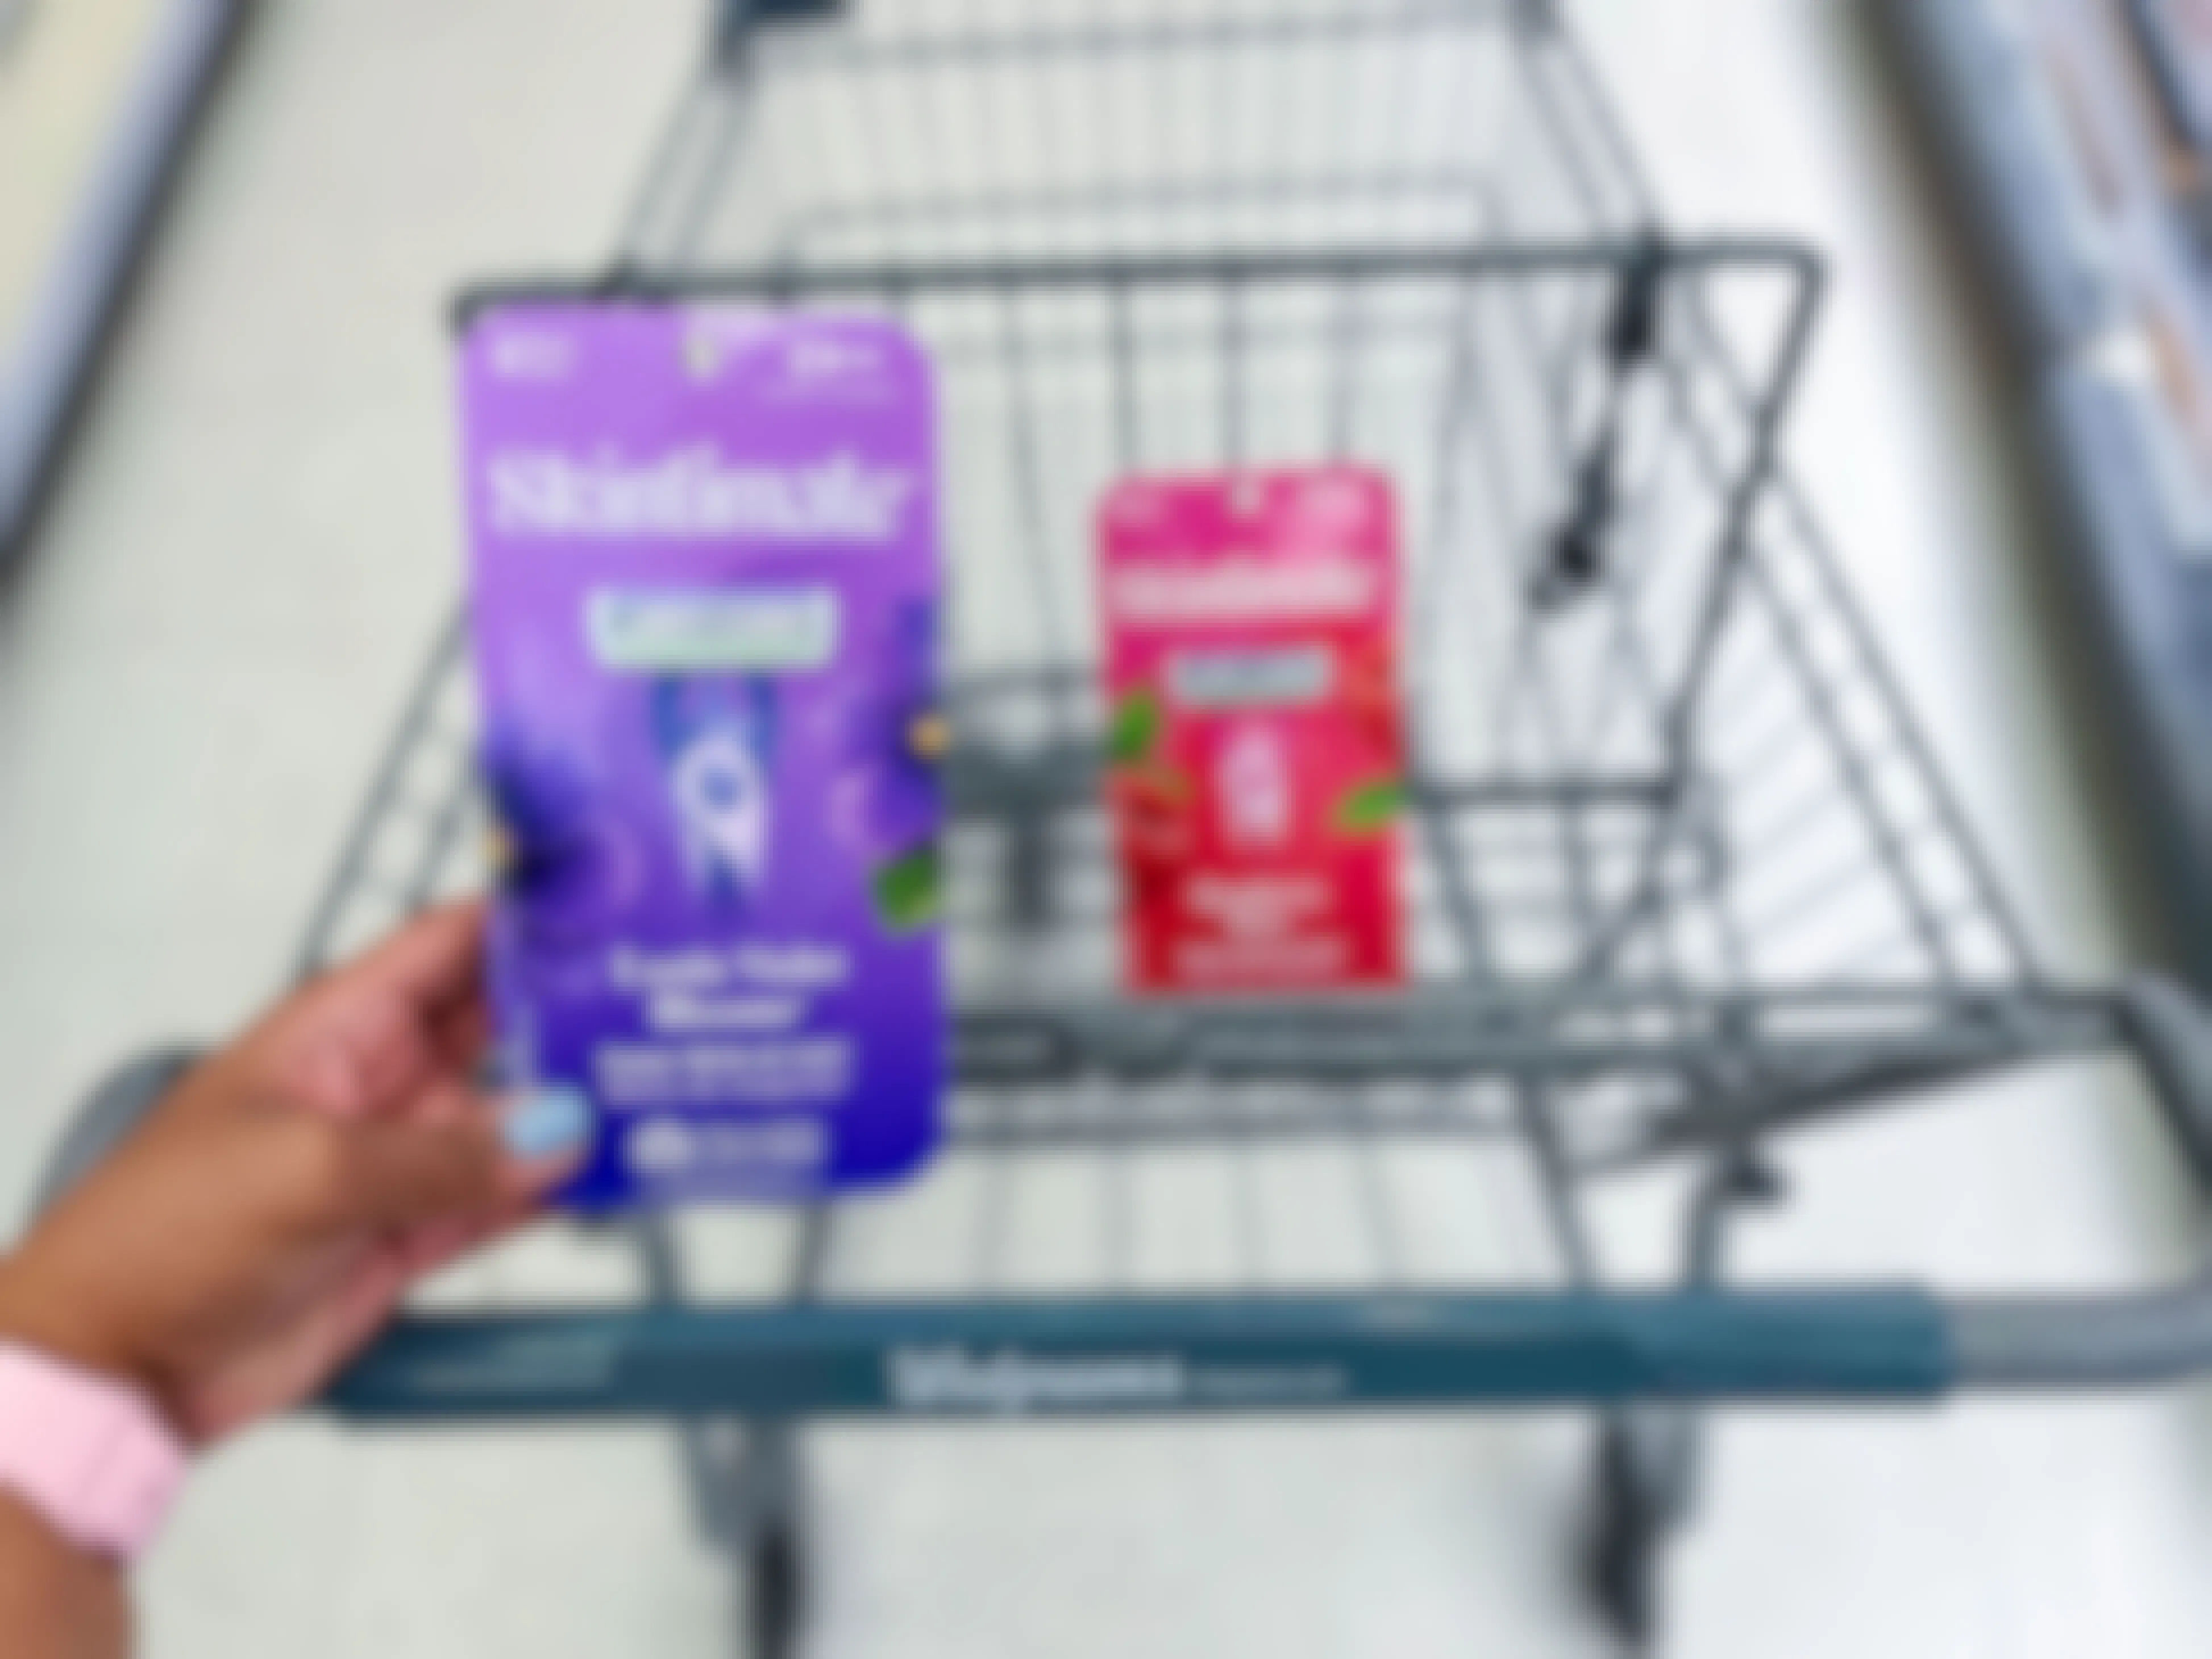 hand holding pack of Skintimate disposable razors in front of another pack in shopping cart